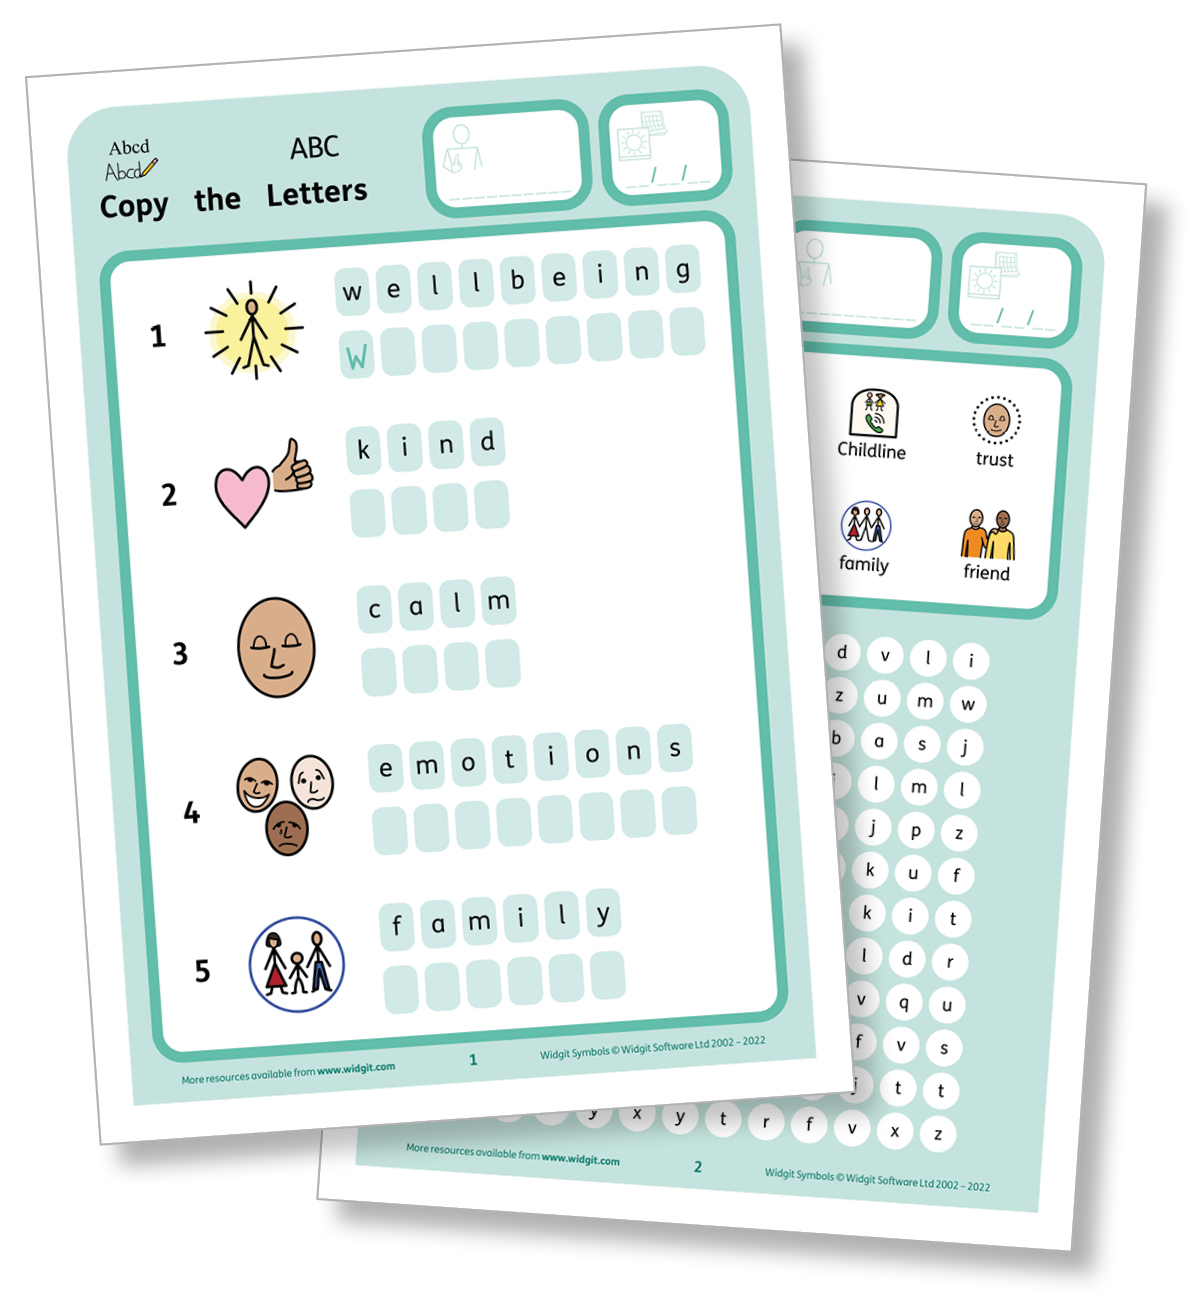 Additional wellbeing resources with Widgit Symbols